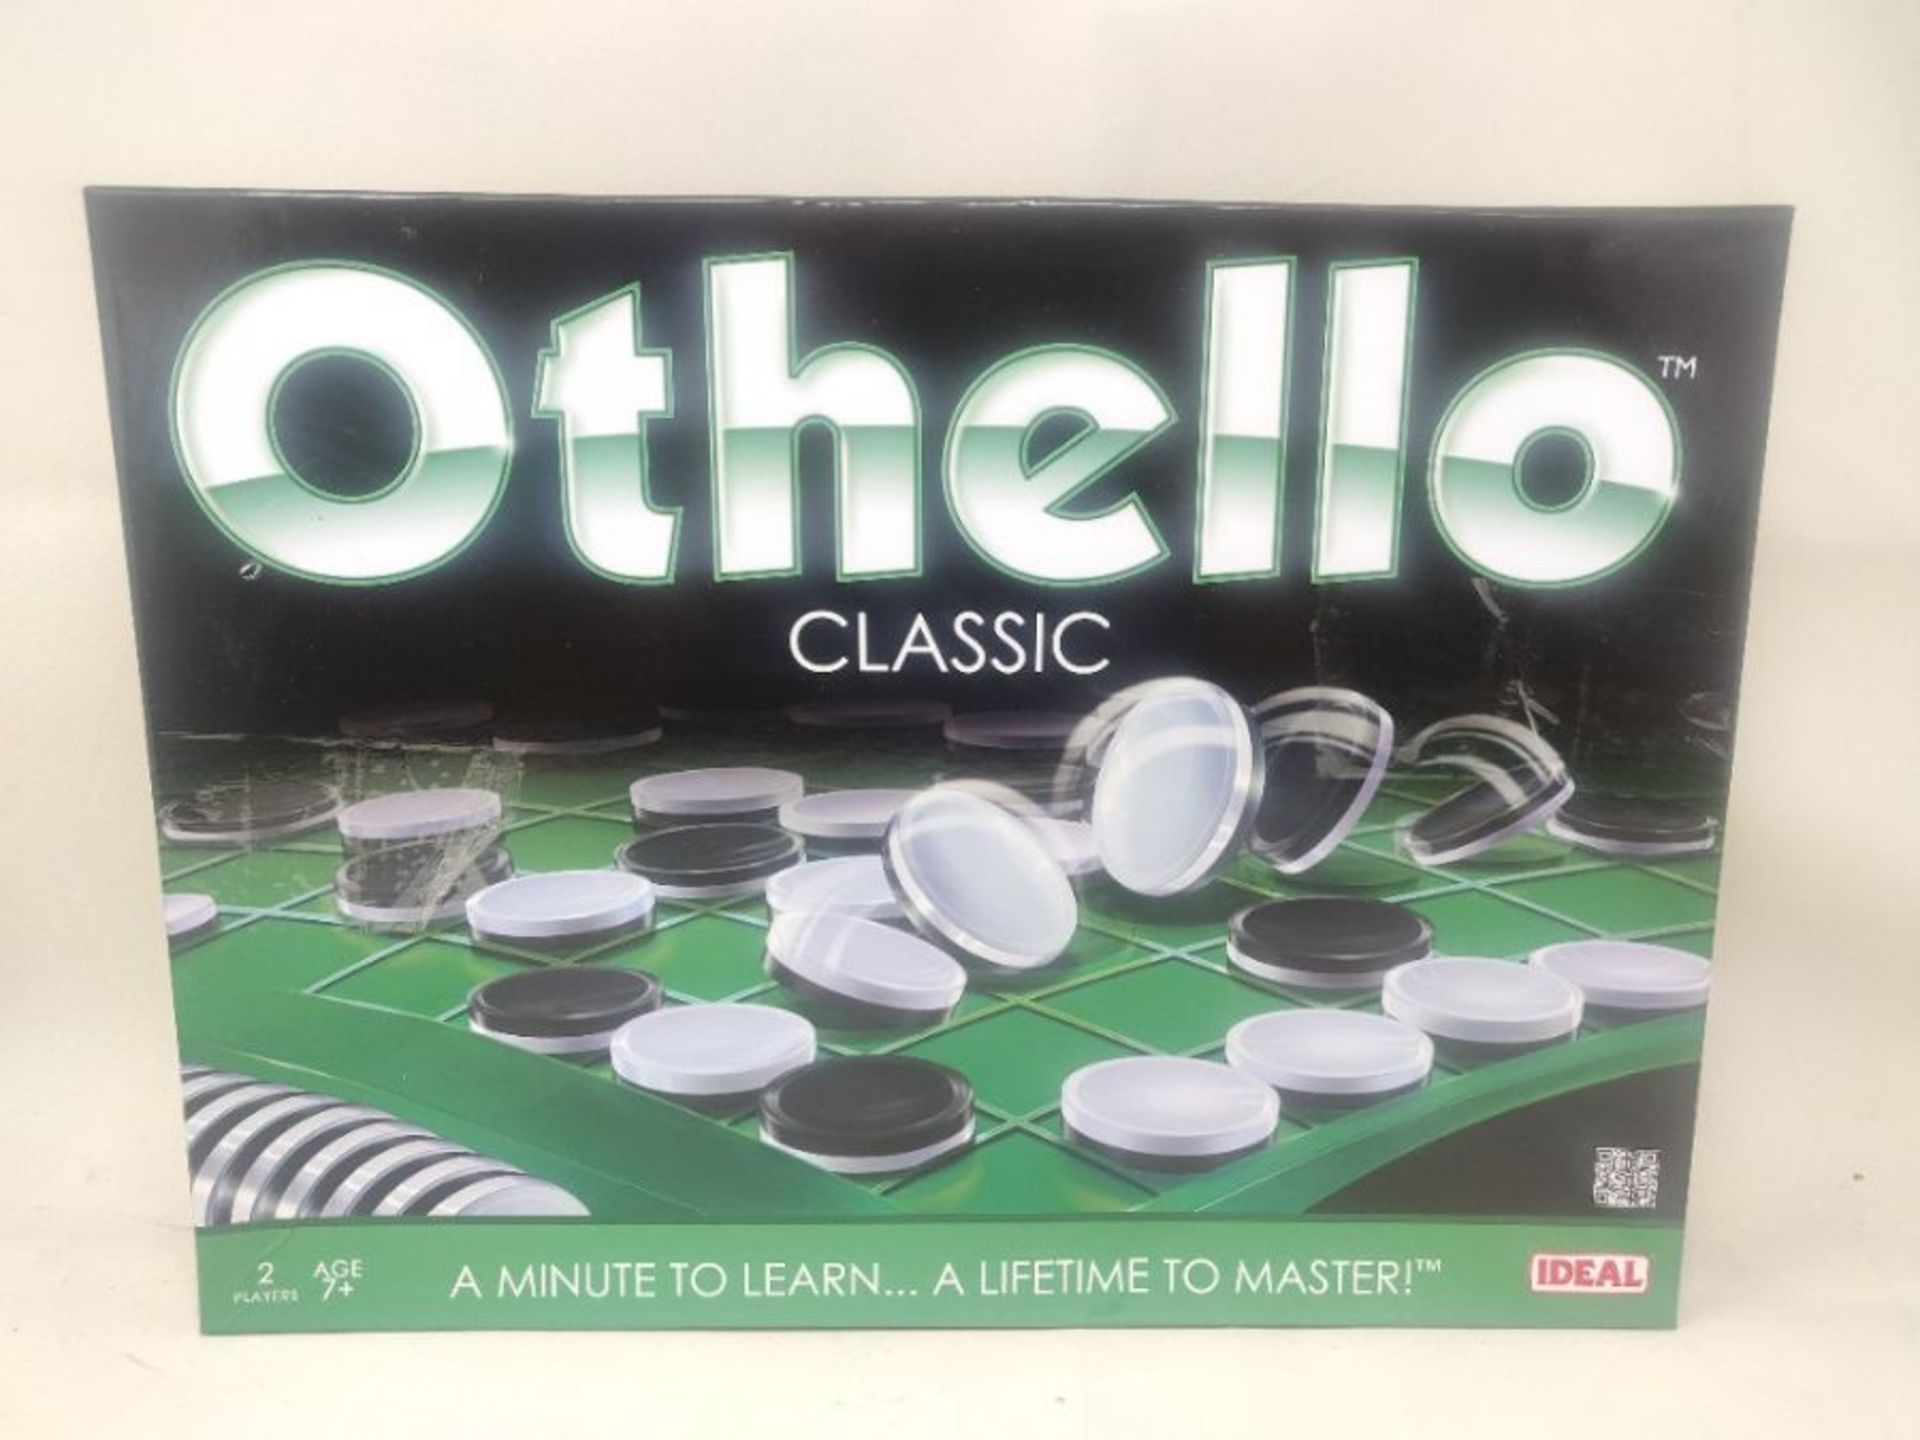 Othello Classic game from Ideal - Image 2 of 3